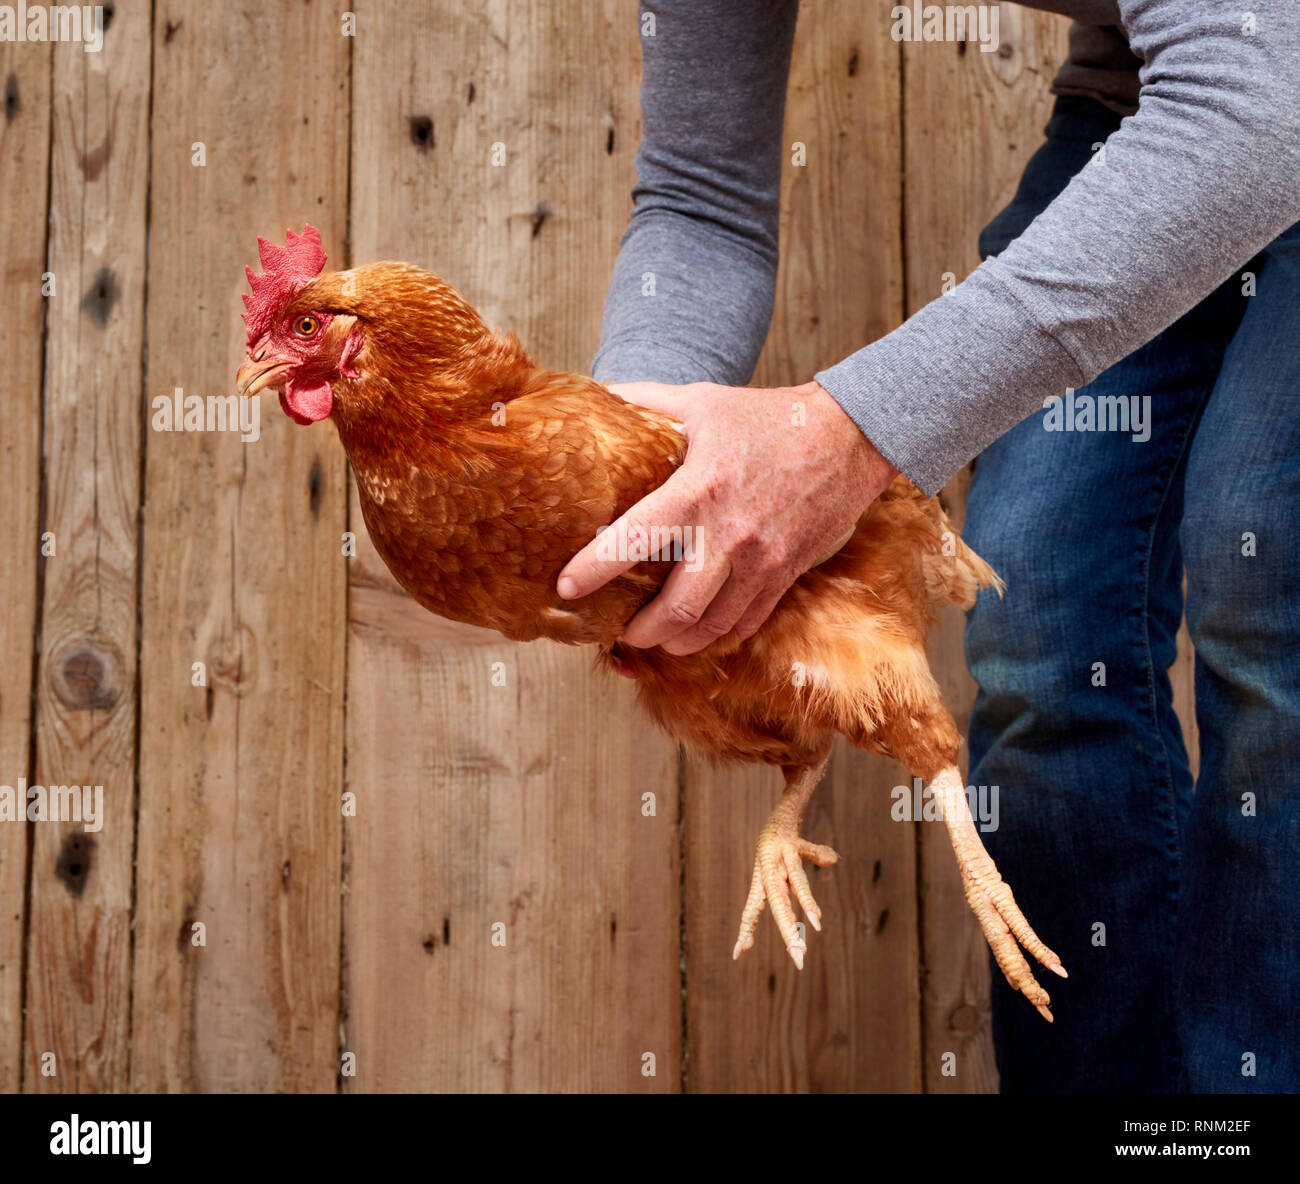 Domestic Chicken. Hen is lifted up with both hands. Germany Stock Photo